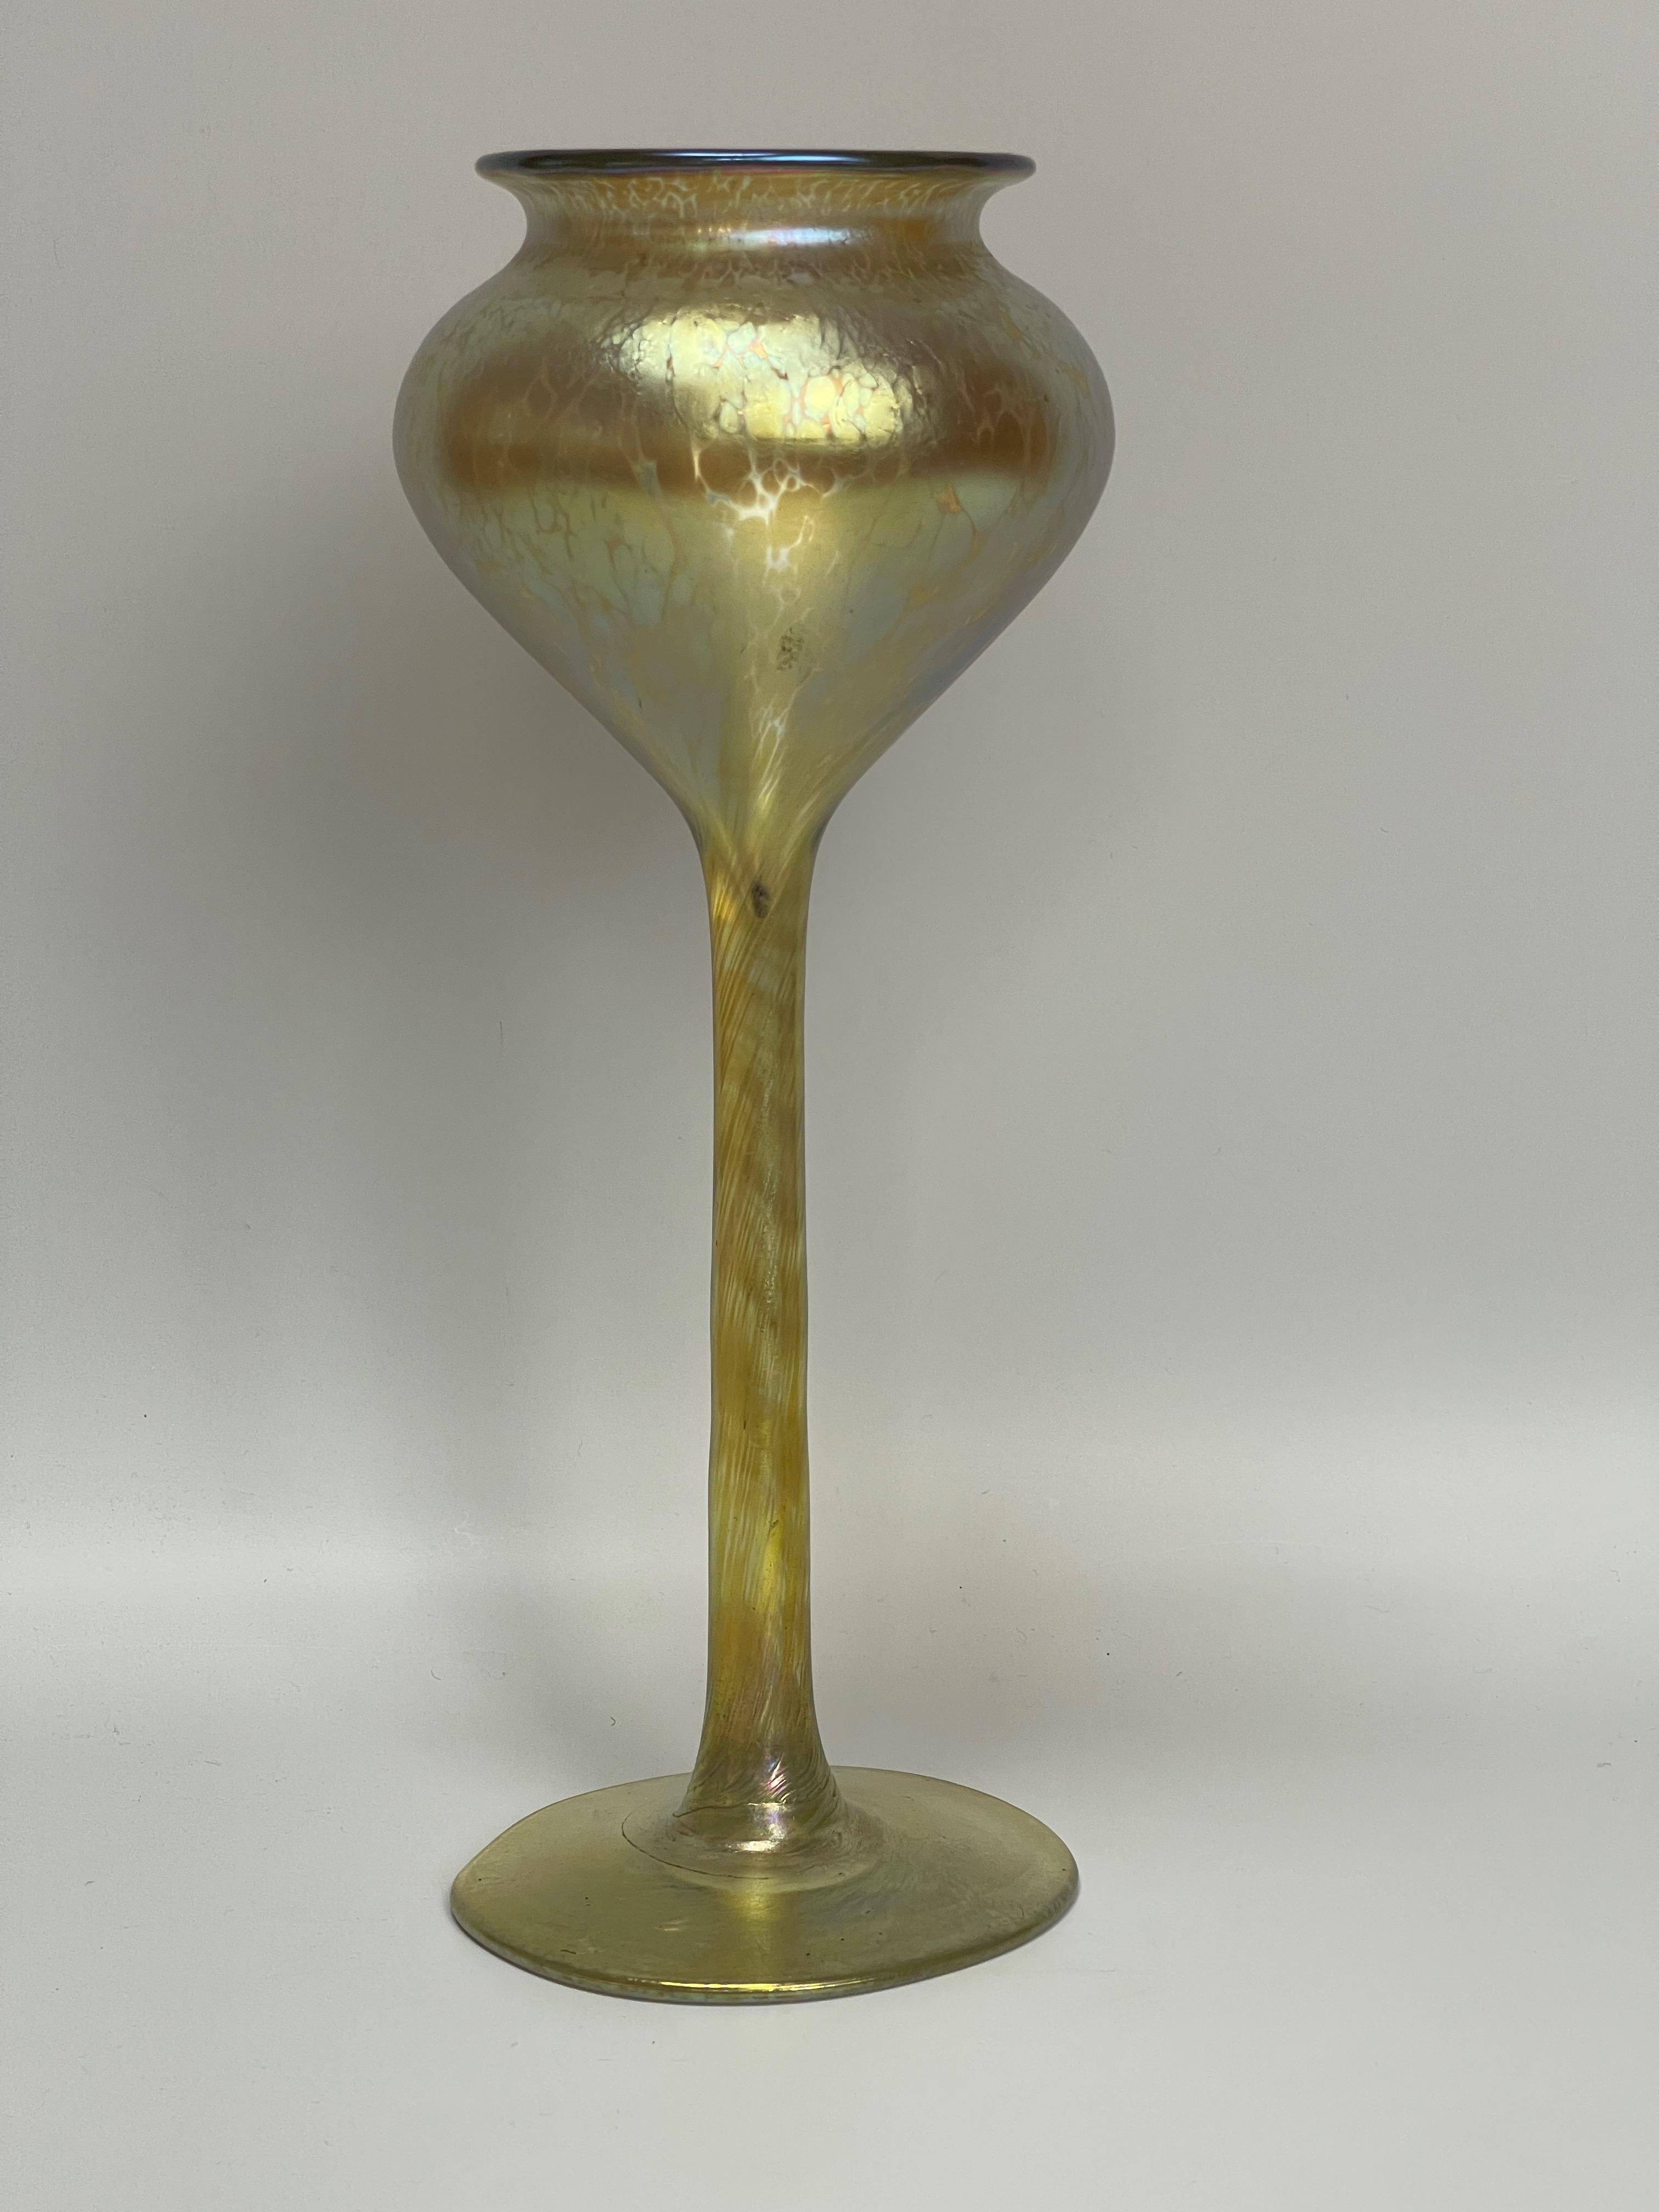 Loetz 1899 chalice in yellow glass model Candia butterfly.
Glassware in perfect condition.
Height: 30.5cm
Collar diameter: 18.5 cm
Base diameter: 11.5 cm
Weight: 750g.

In 1836, Johann Eisner established a glassworks in the South Bohemian